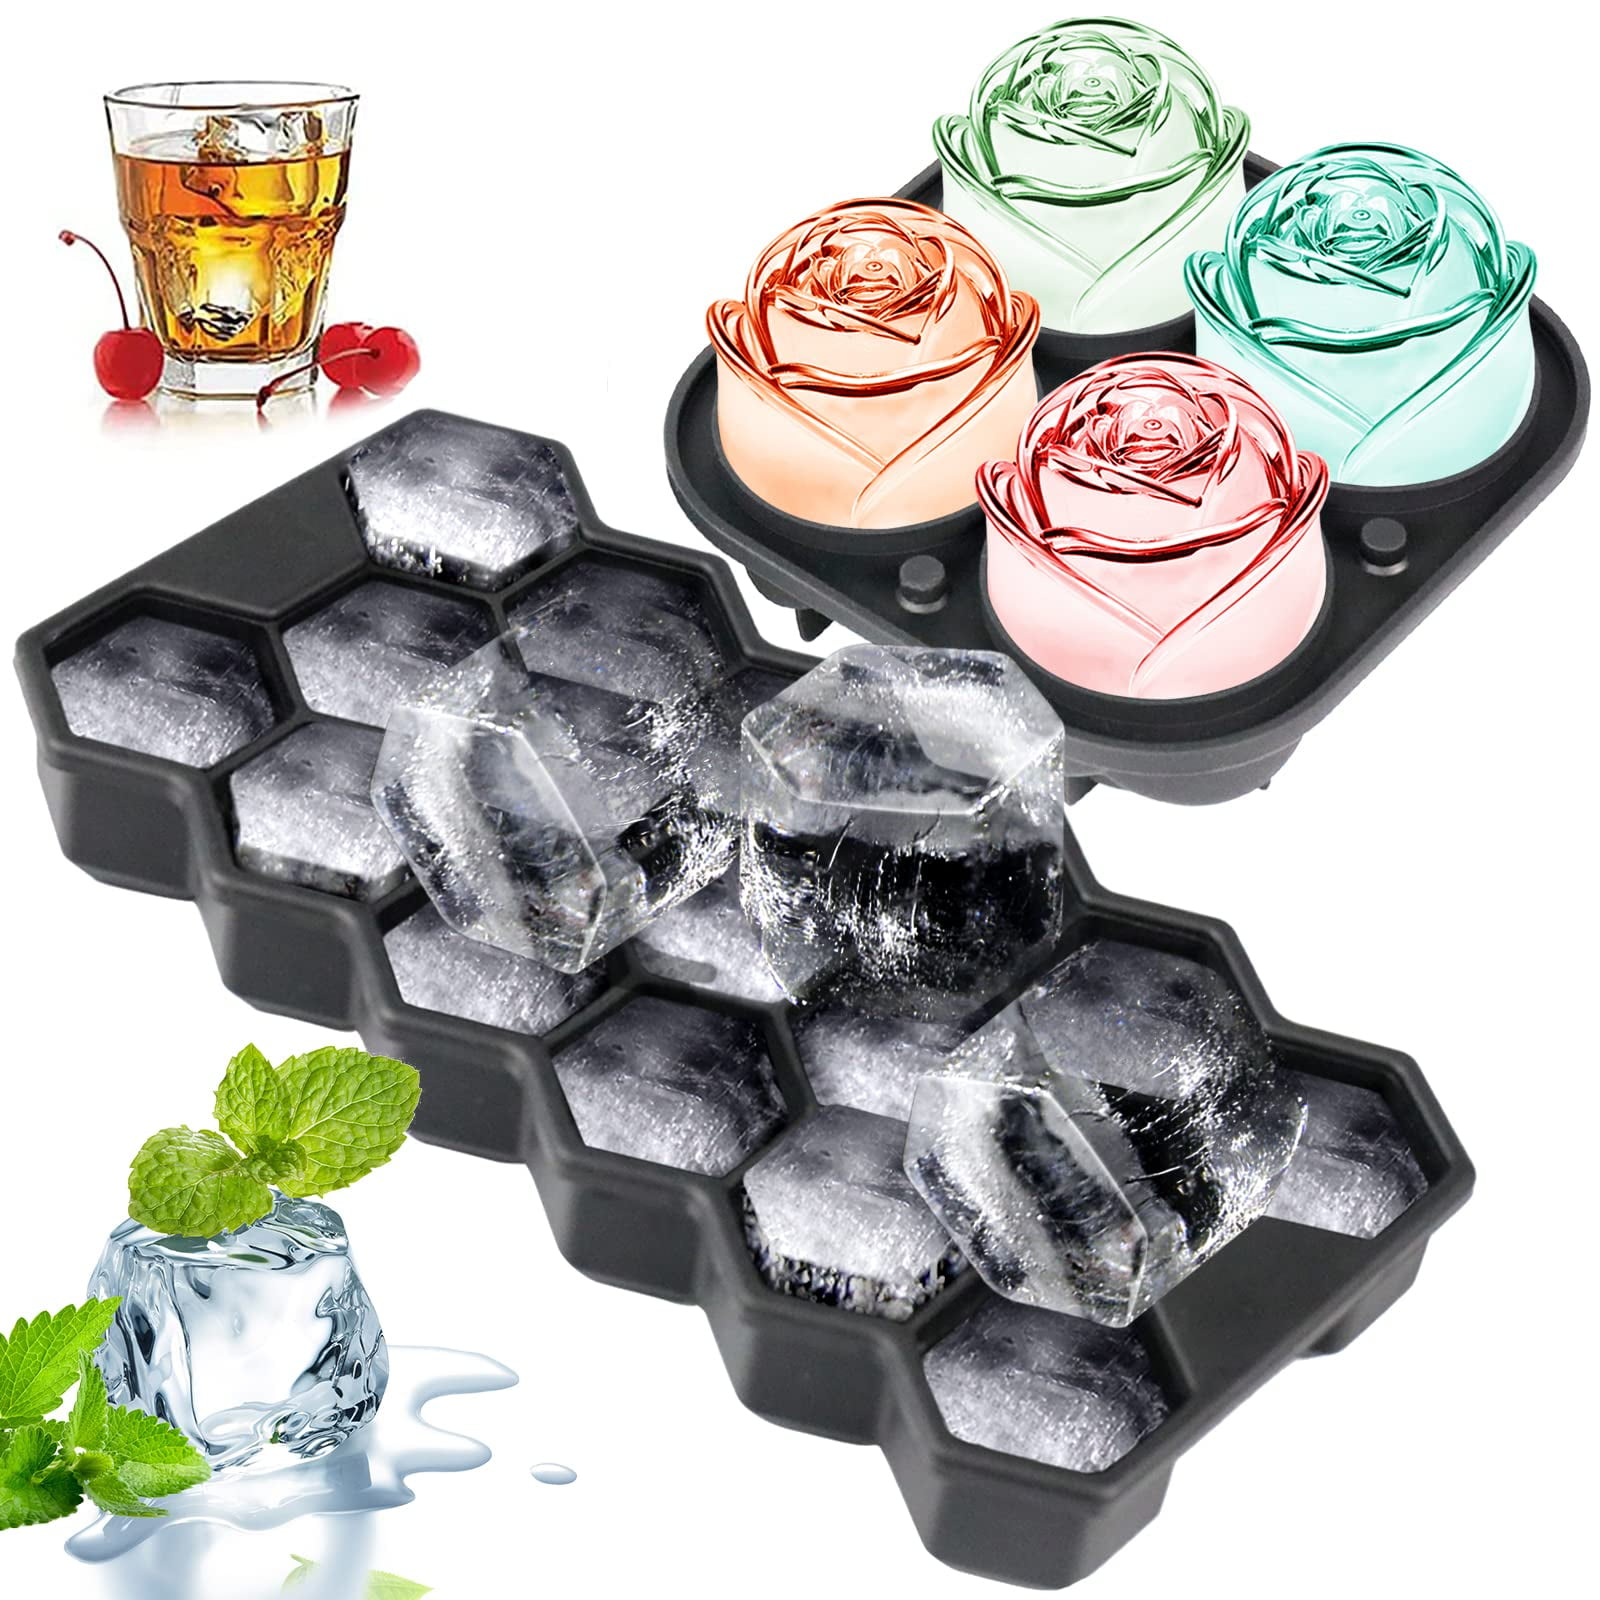 ❤️Mother's Day Sale- 49% OFF) 3D Silicone Rose Shape Ice Cube Mold